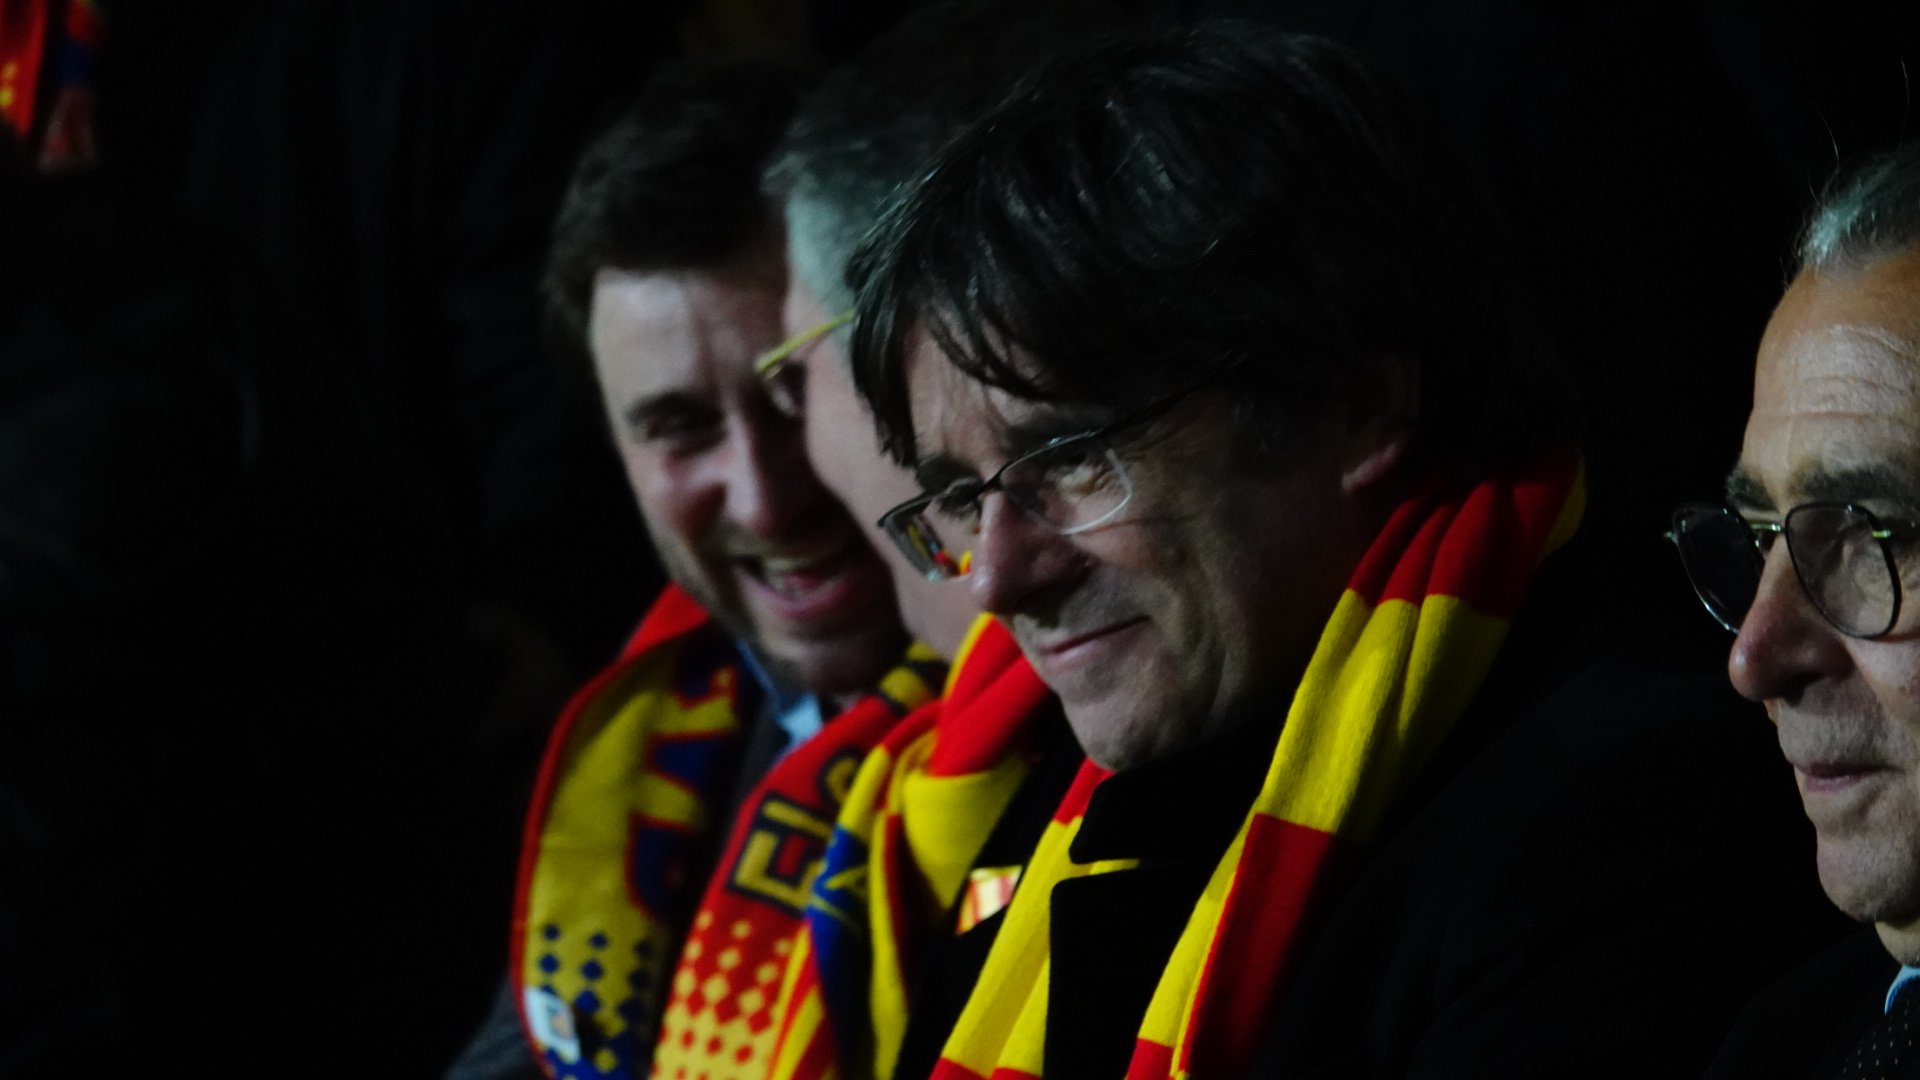 Puigdemont, welcomed to Perpinyà: "I'm excited to be back on Catalan soil"